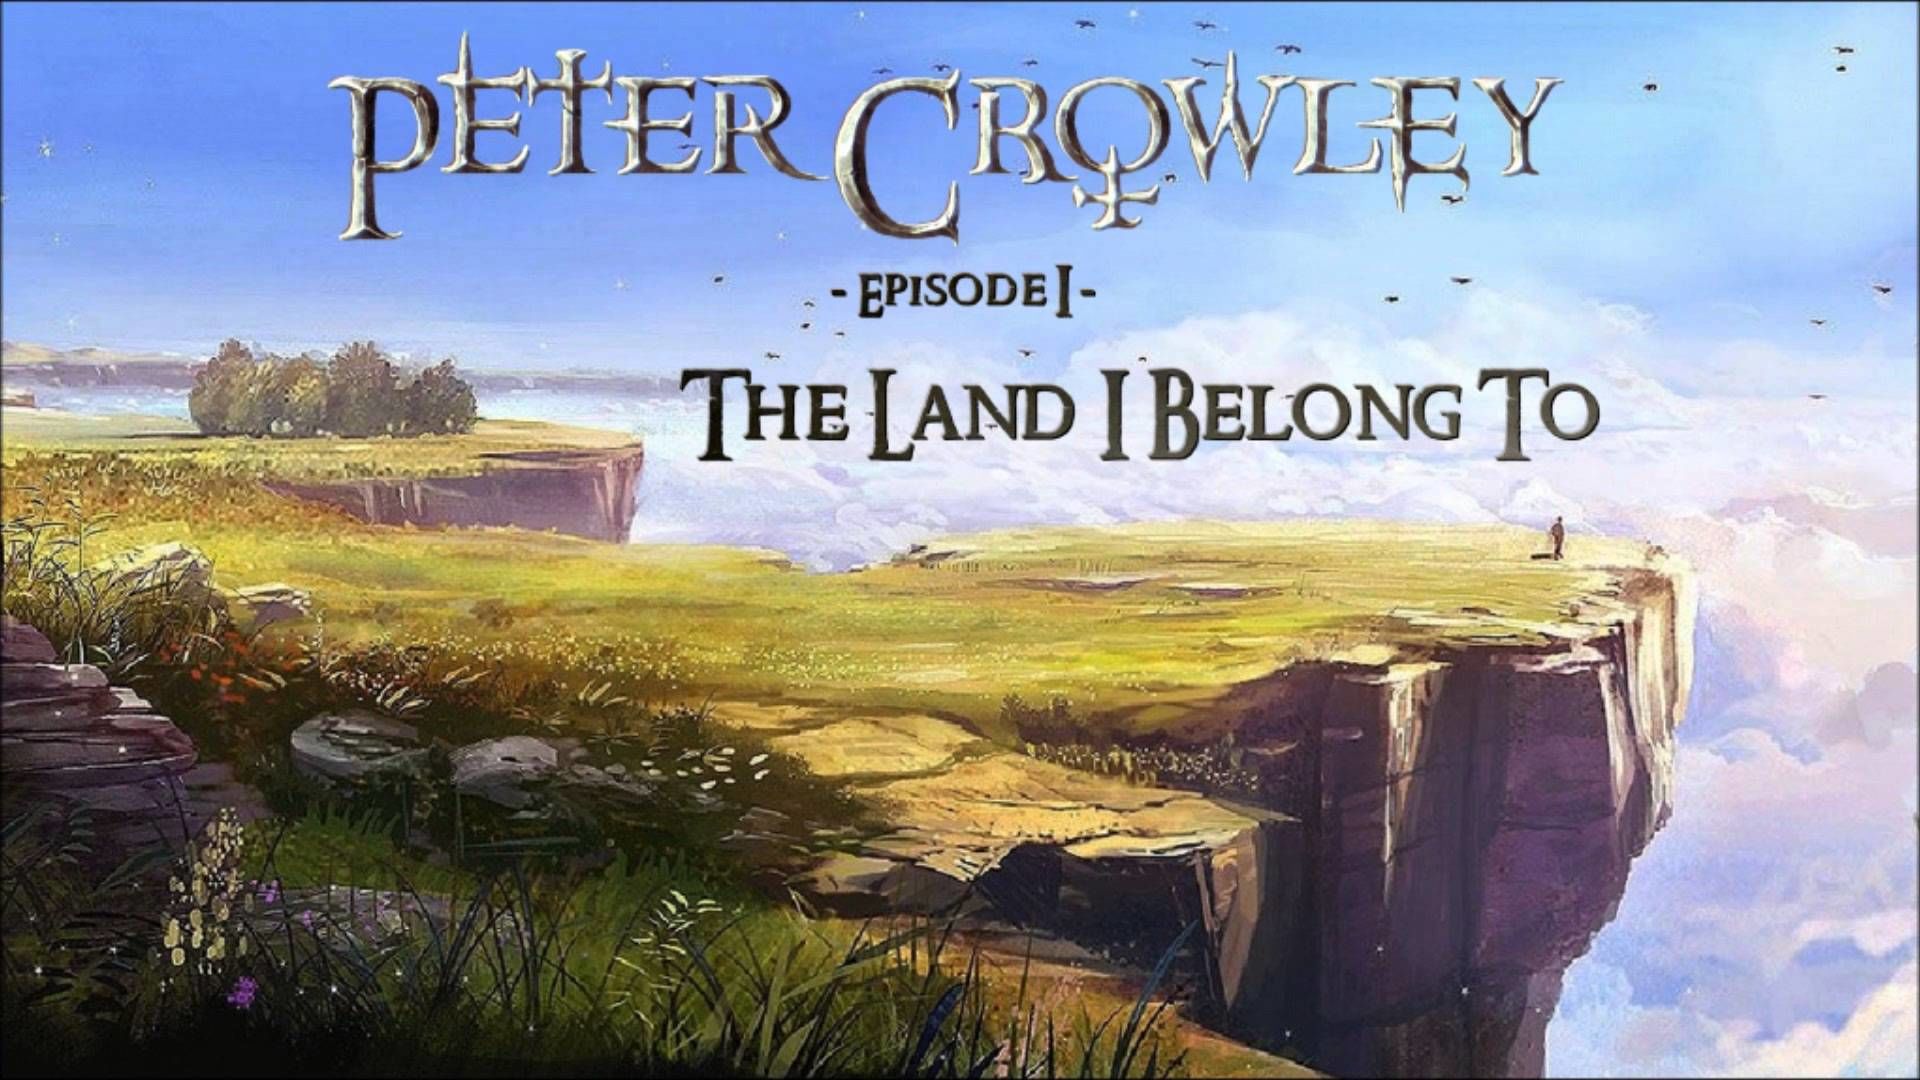 Peter Crowley - Dragon Legend Ep1 (The Land I Belong To.)